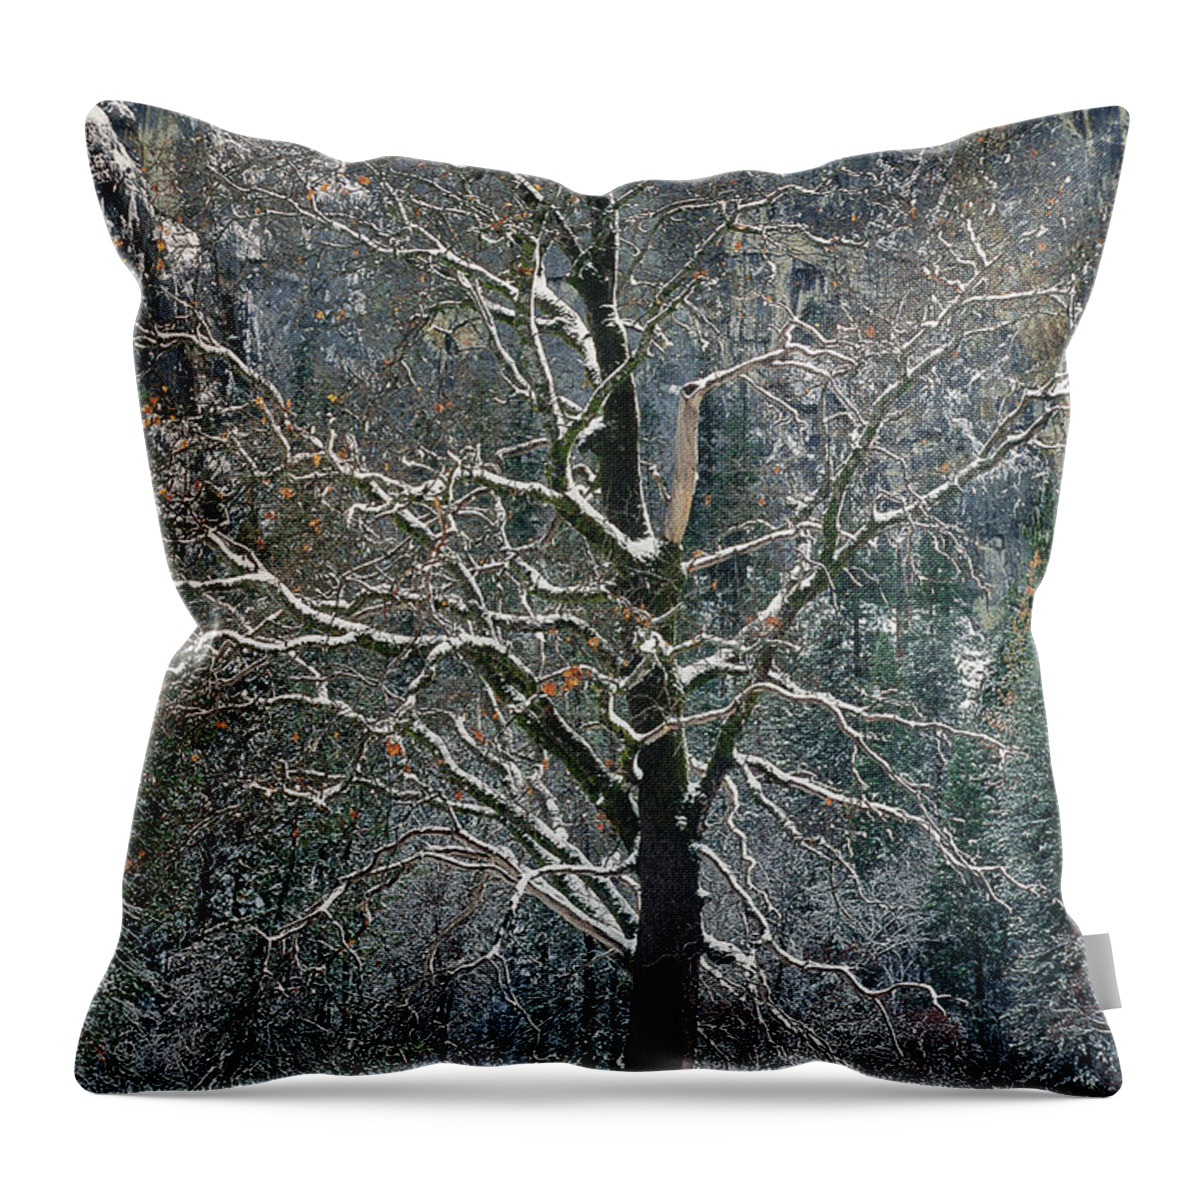 Black Oak Throw Pillow featuring the photograph Black Oak Quercus Kelloggii With Dusting Of Snow by Dave Welling